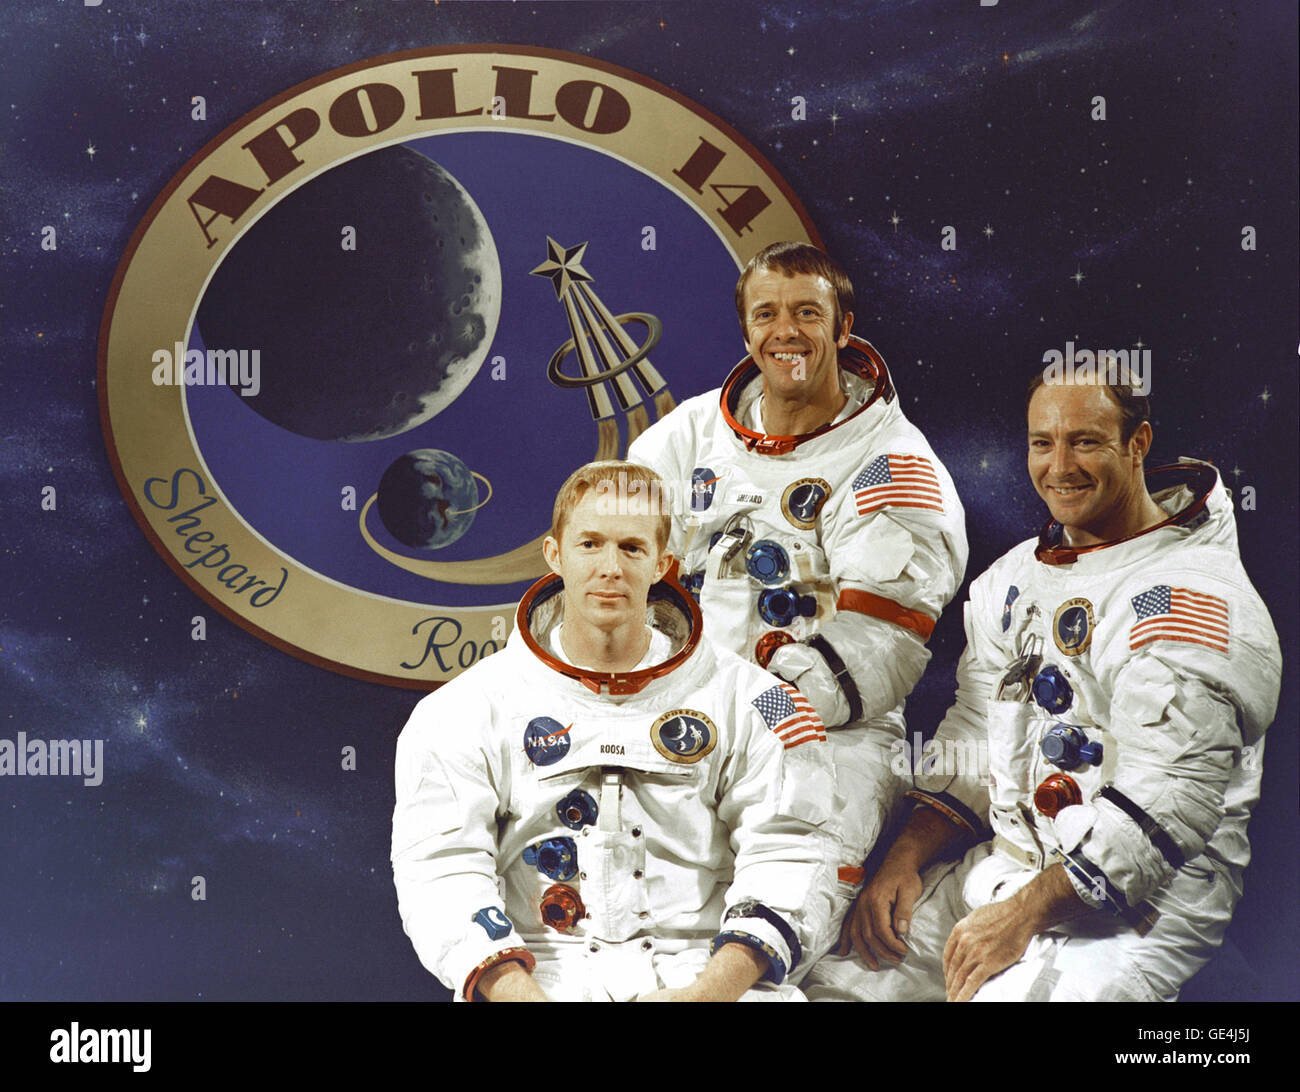 (December 3, 1970) The prime crew of the Apollo 14 lunar landing mission. From left to right they are: Command Module pilot, Stuart A. Roosa, Commander, Alan B. Shepard Jr. and Lunar Module pilot Edgar D. Mitchell. The Apollo 14 mission emblem is in the background.  Image # : S70-55387 Stock Photo